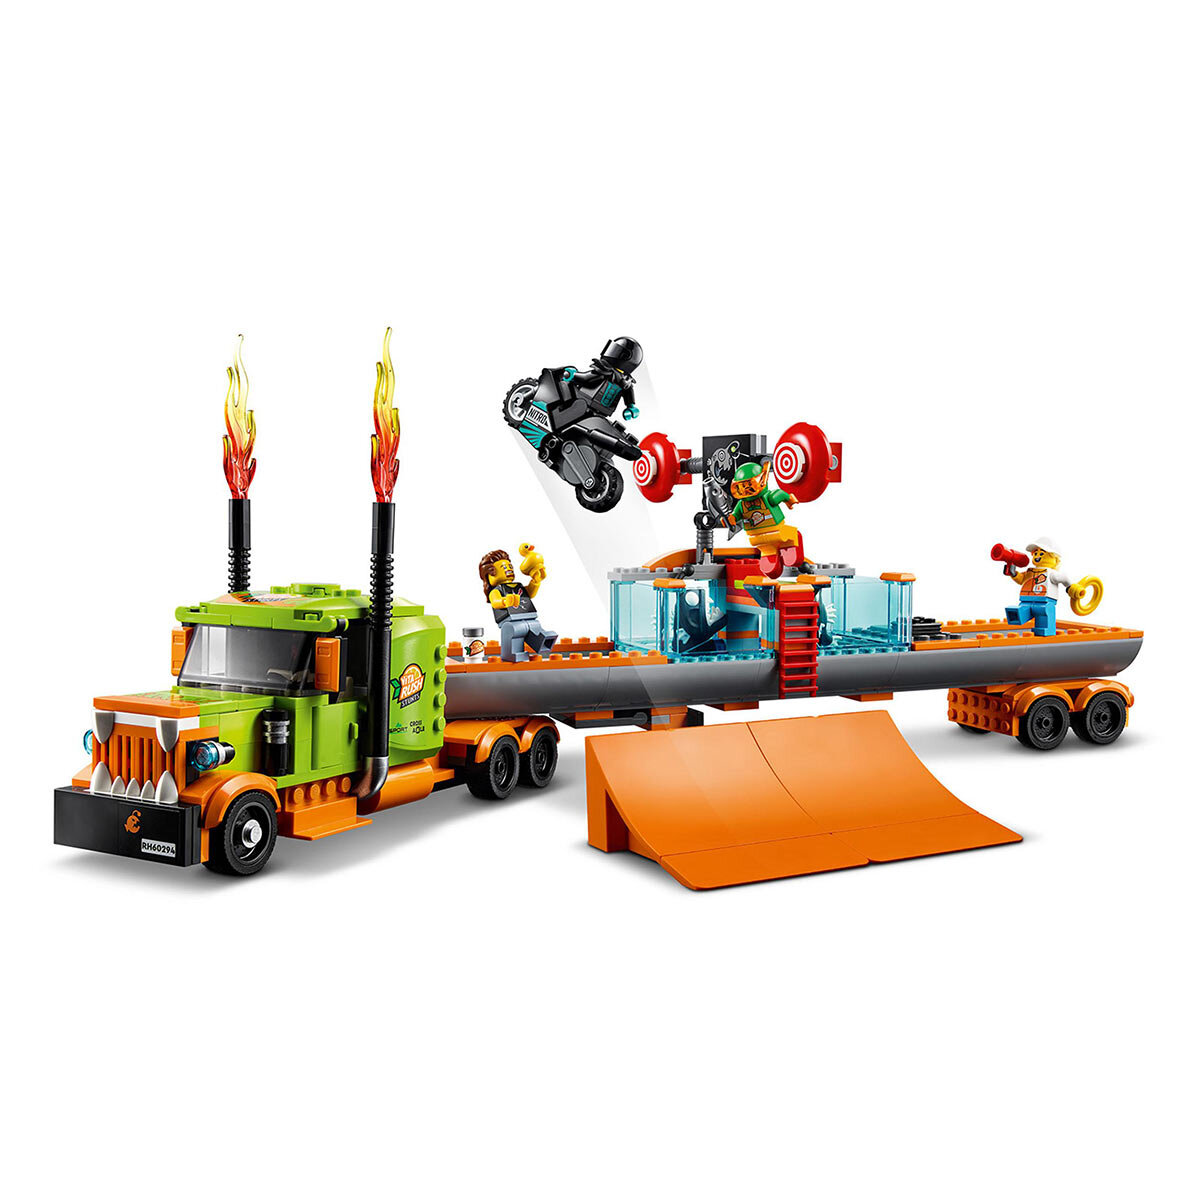 Buy LEGO City Stunt Truck Overview Image at Costco.co.uk